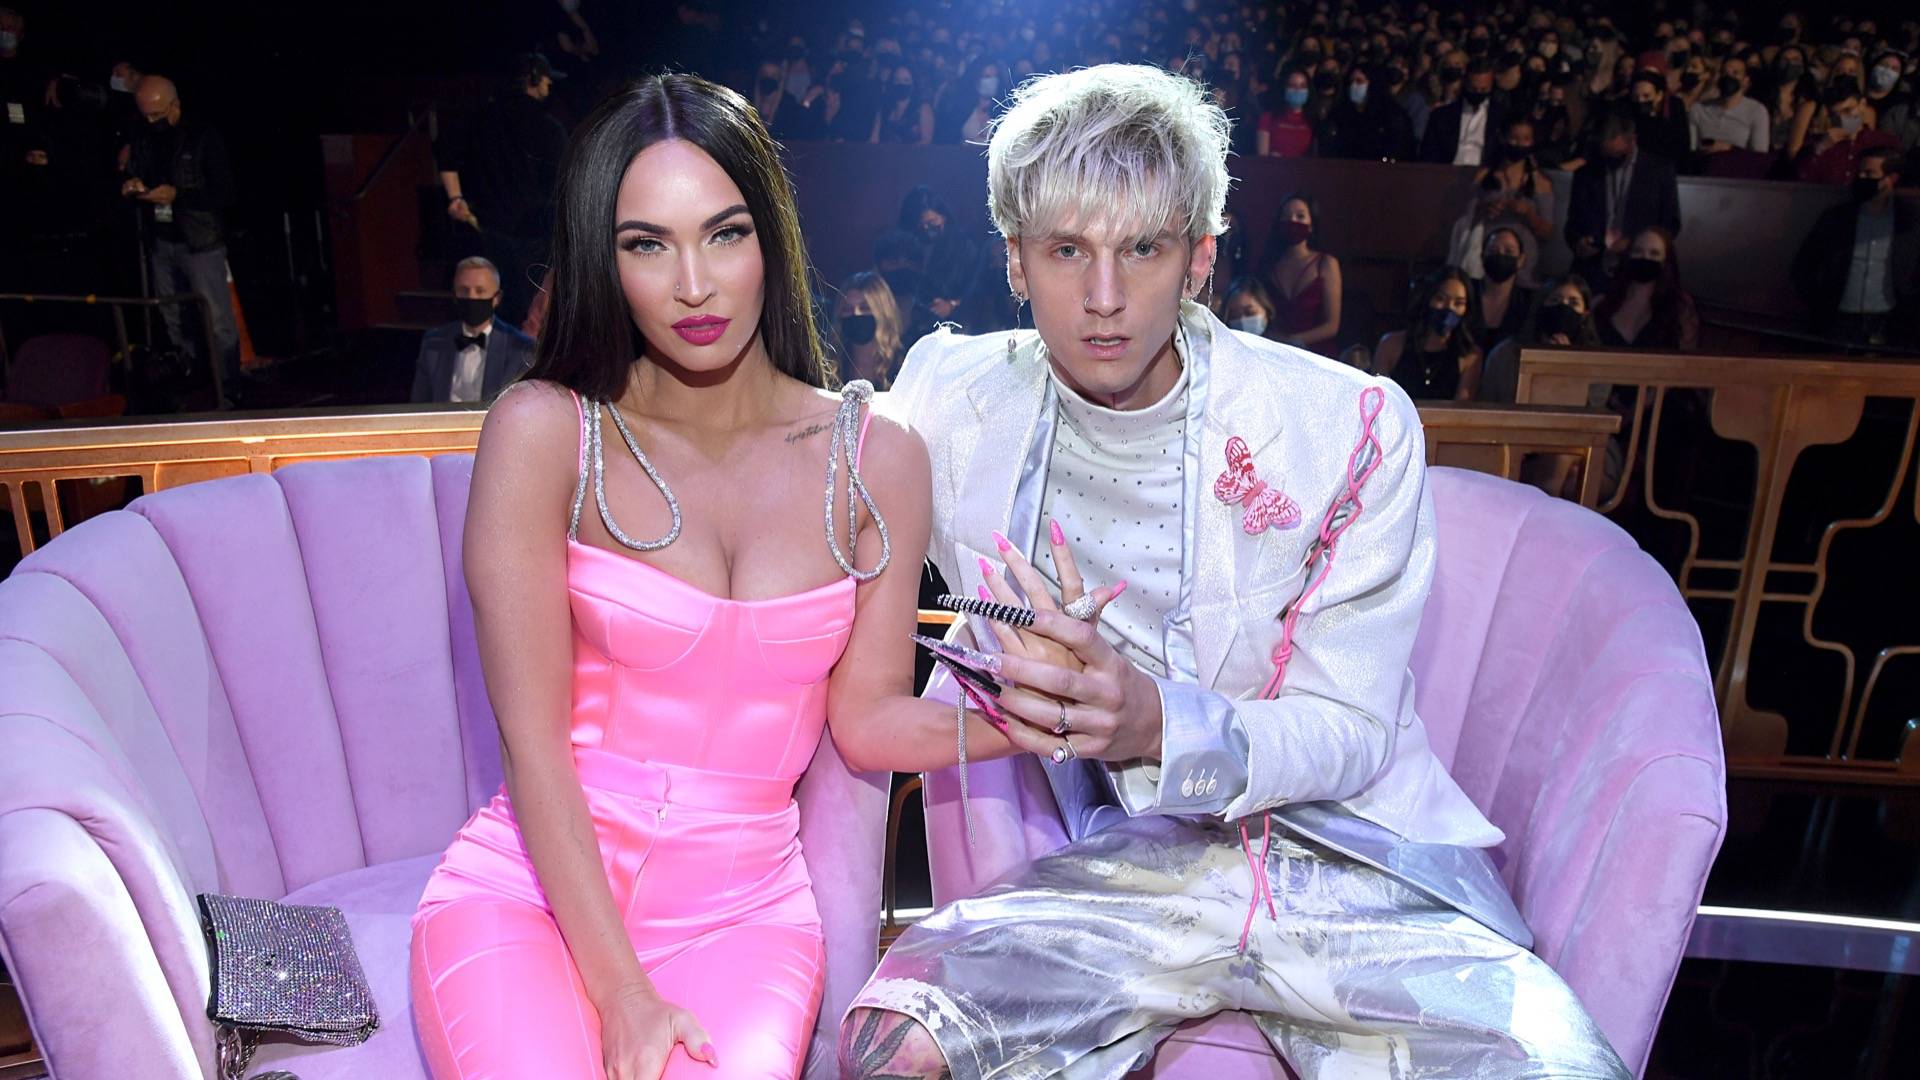 Megan Fox in pink jumpsuit sitting next to Machine Gun Kelly in silver short suit. The two have their hands entangled and are sitting on a plush light purple sofa 